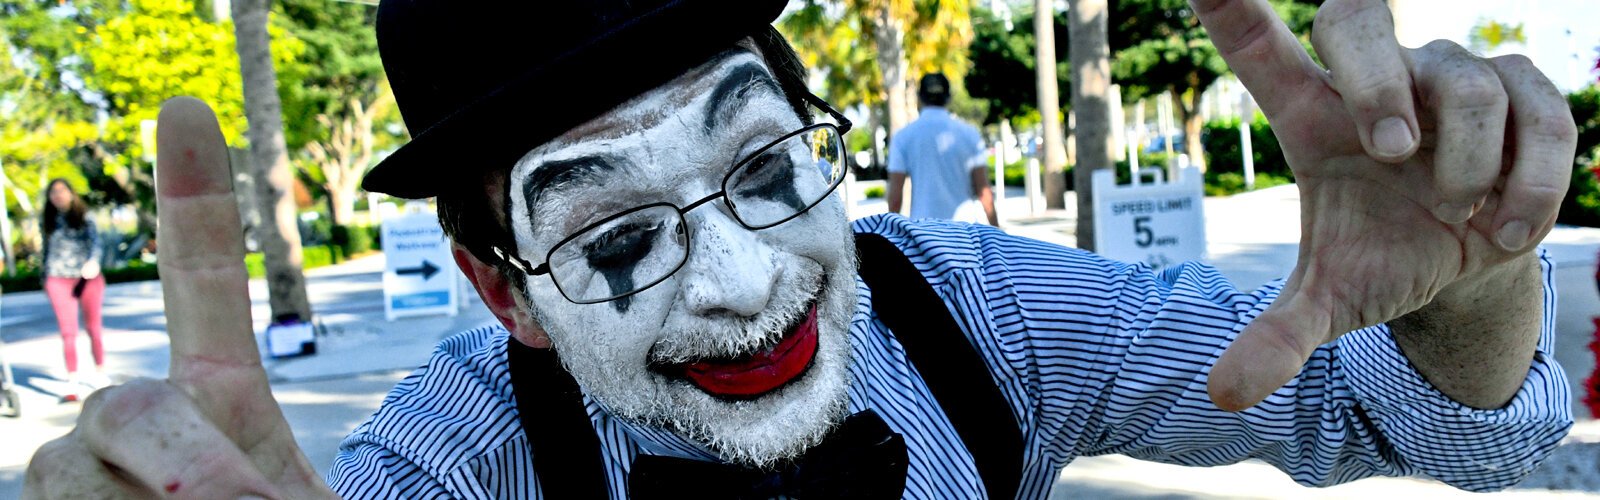 You never know who will pop up in front of your viewfinder at the St Pete Pier, whether a mime, a musician or a performer.